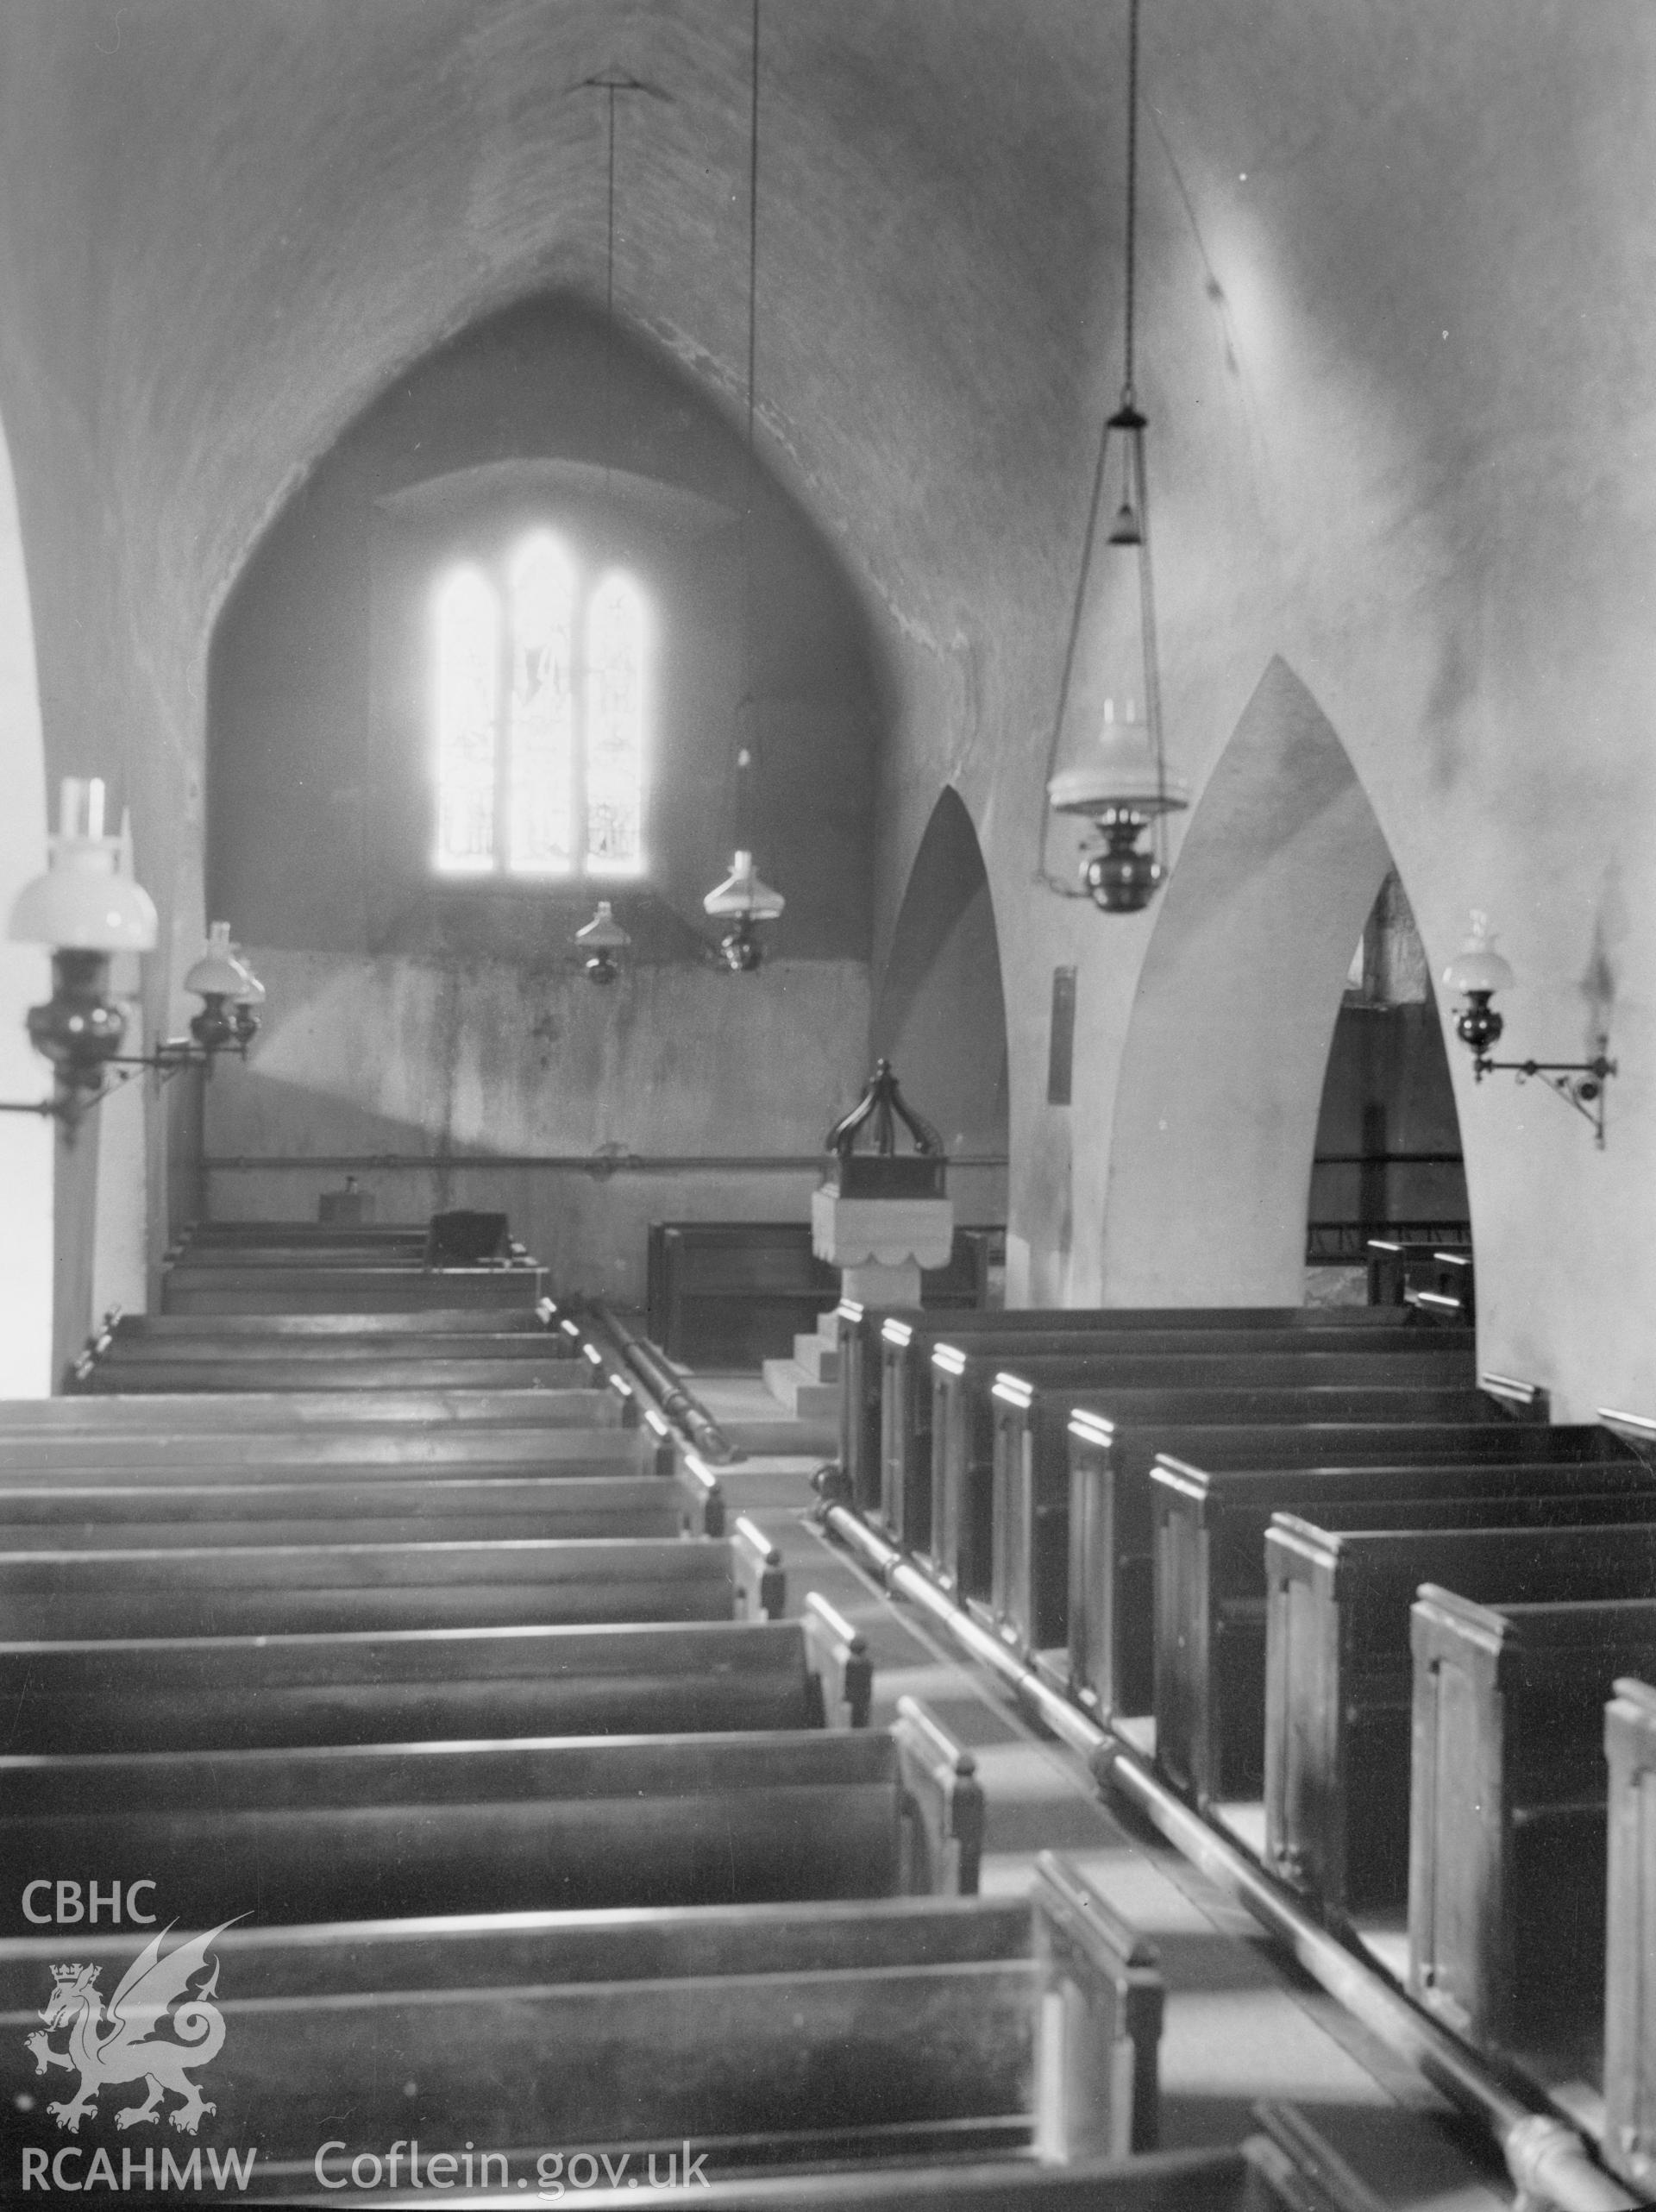 Digital copy of a nitrate negative showing interior view from east, St James's Church,  Manorbier. From the National Building Record Postcard Collection.